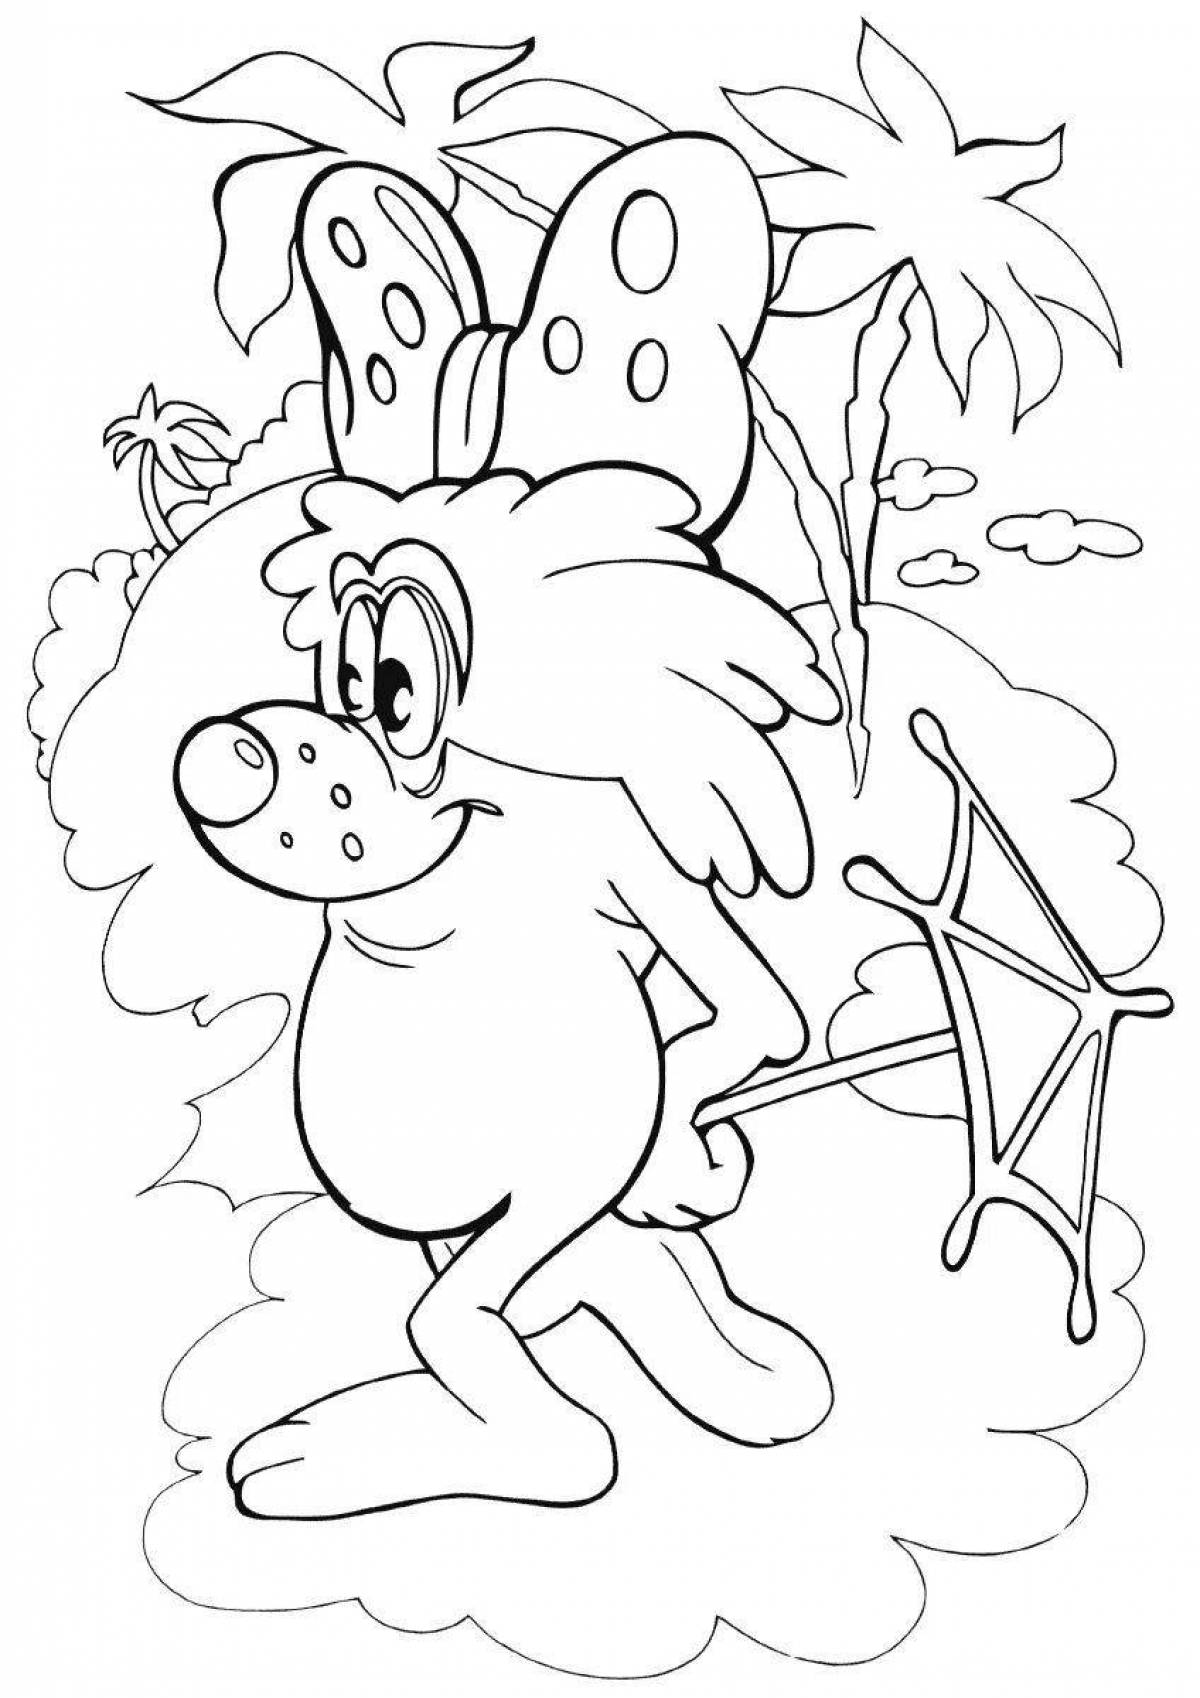 Coloring expression coloring page create a coloring page from a picture